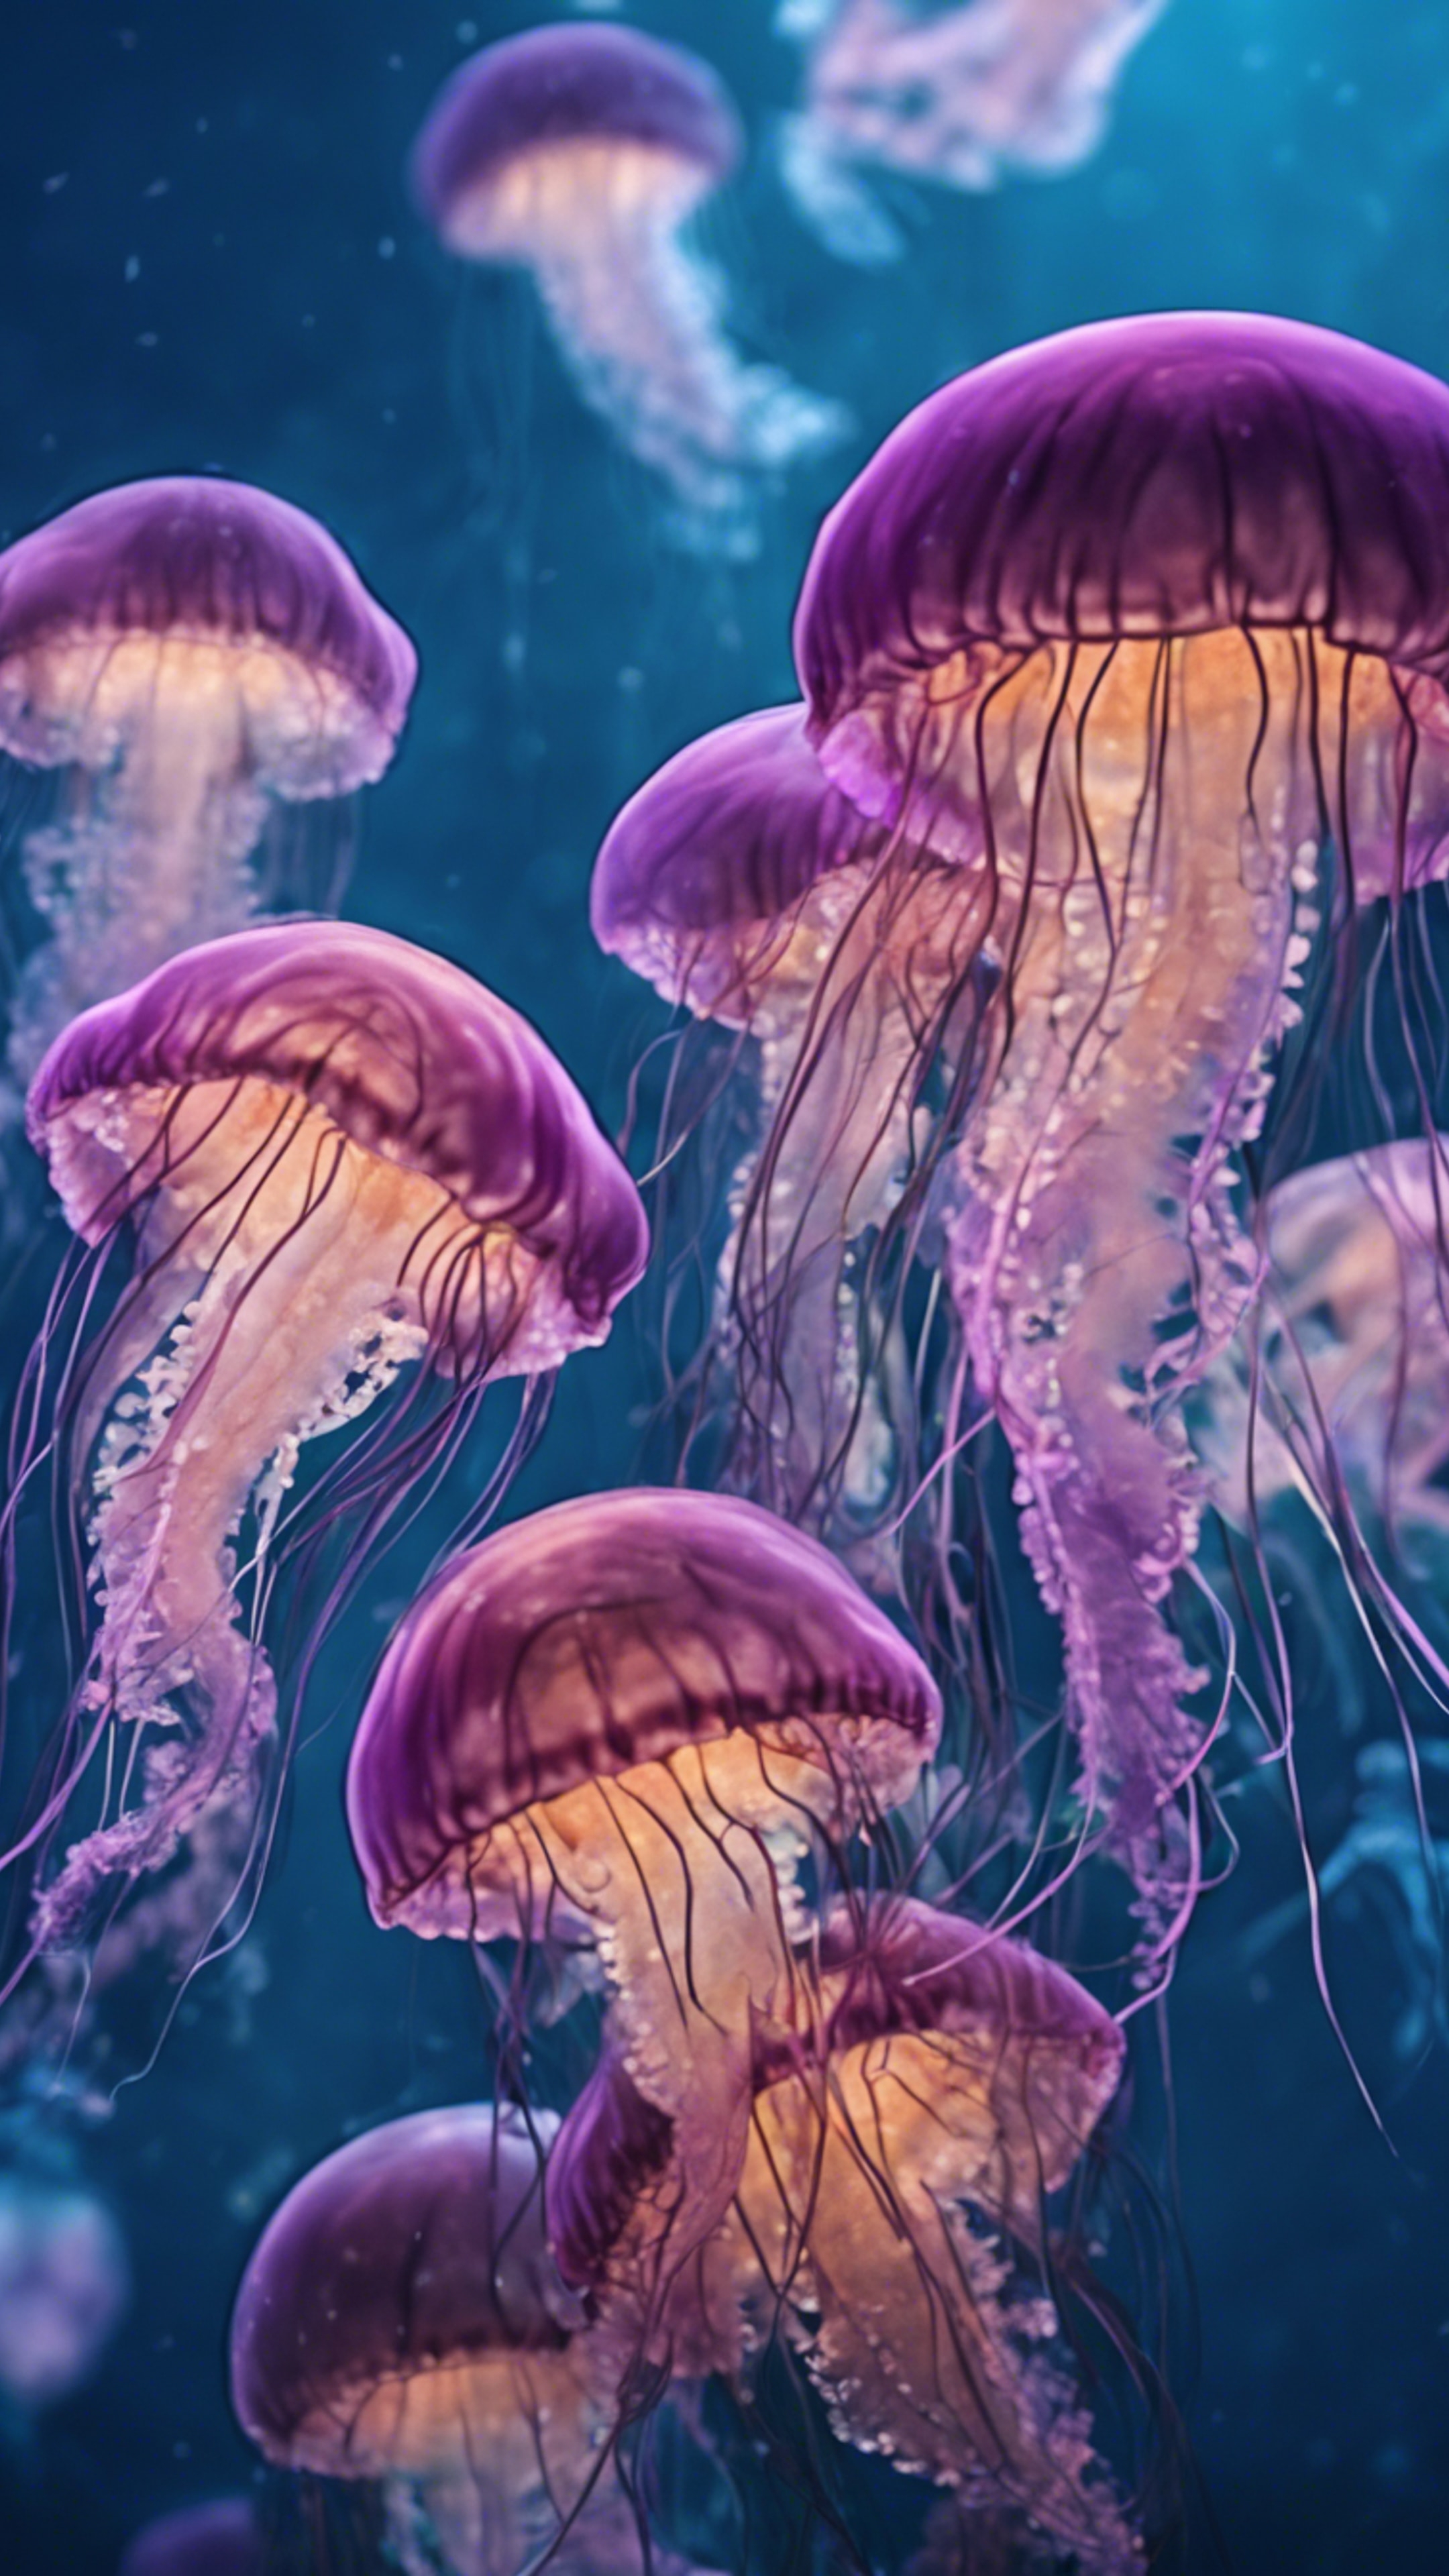 A detailed illustration of a group of ethereal jellyfish glowing in hues of blues and purples in the deep ocean. duvar kağıdı[9d08a2d997244e79aa03]